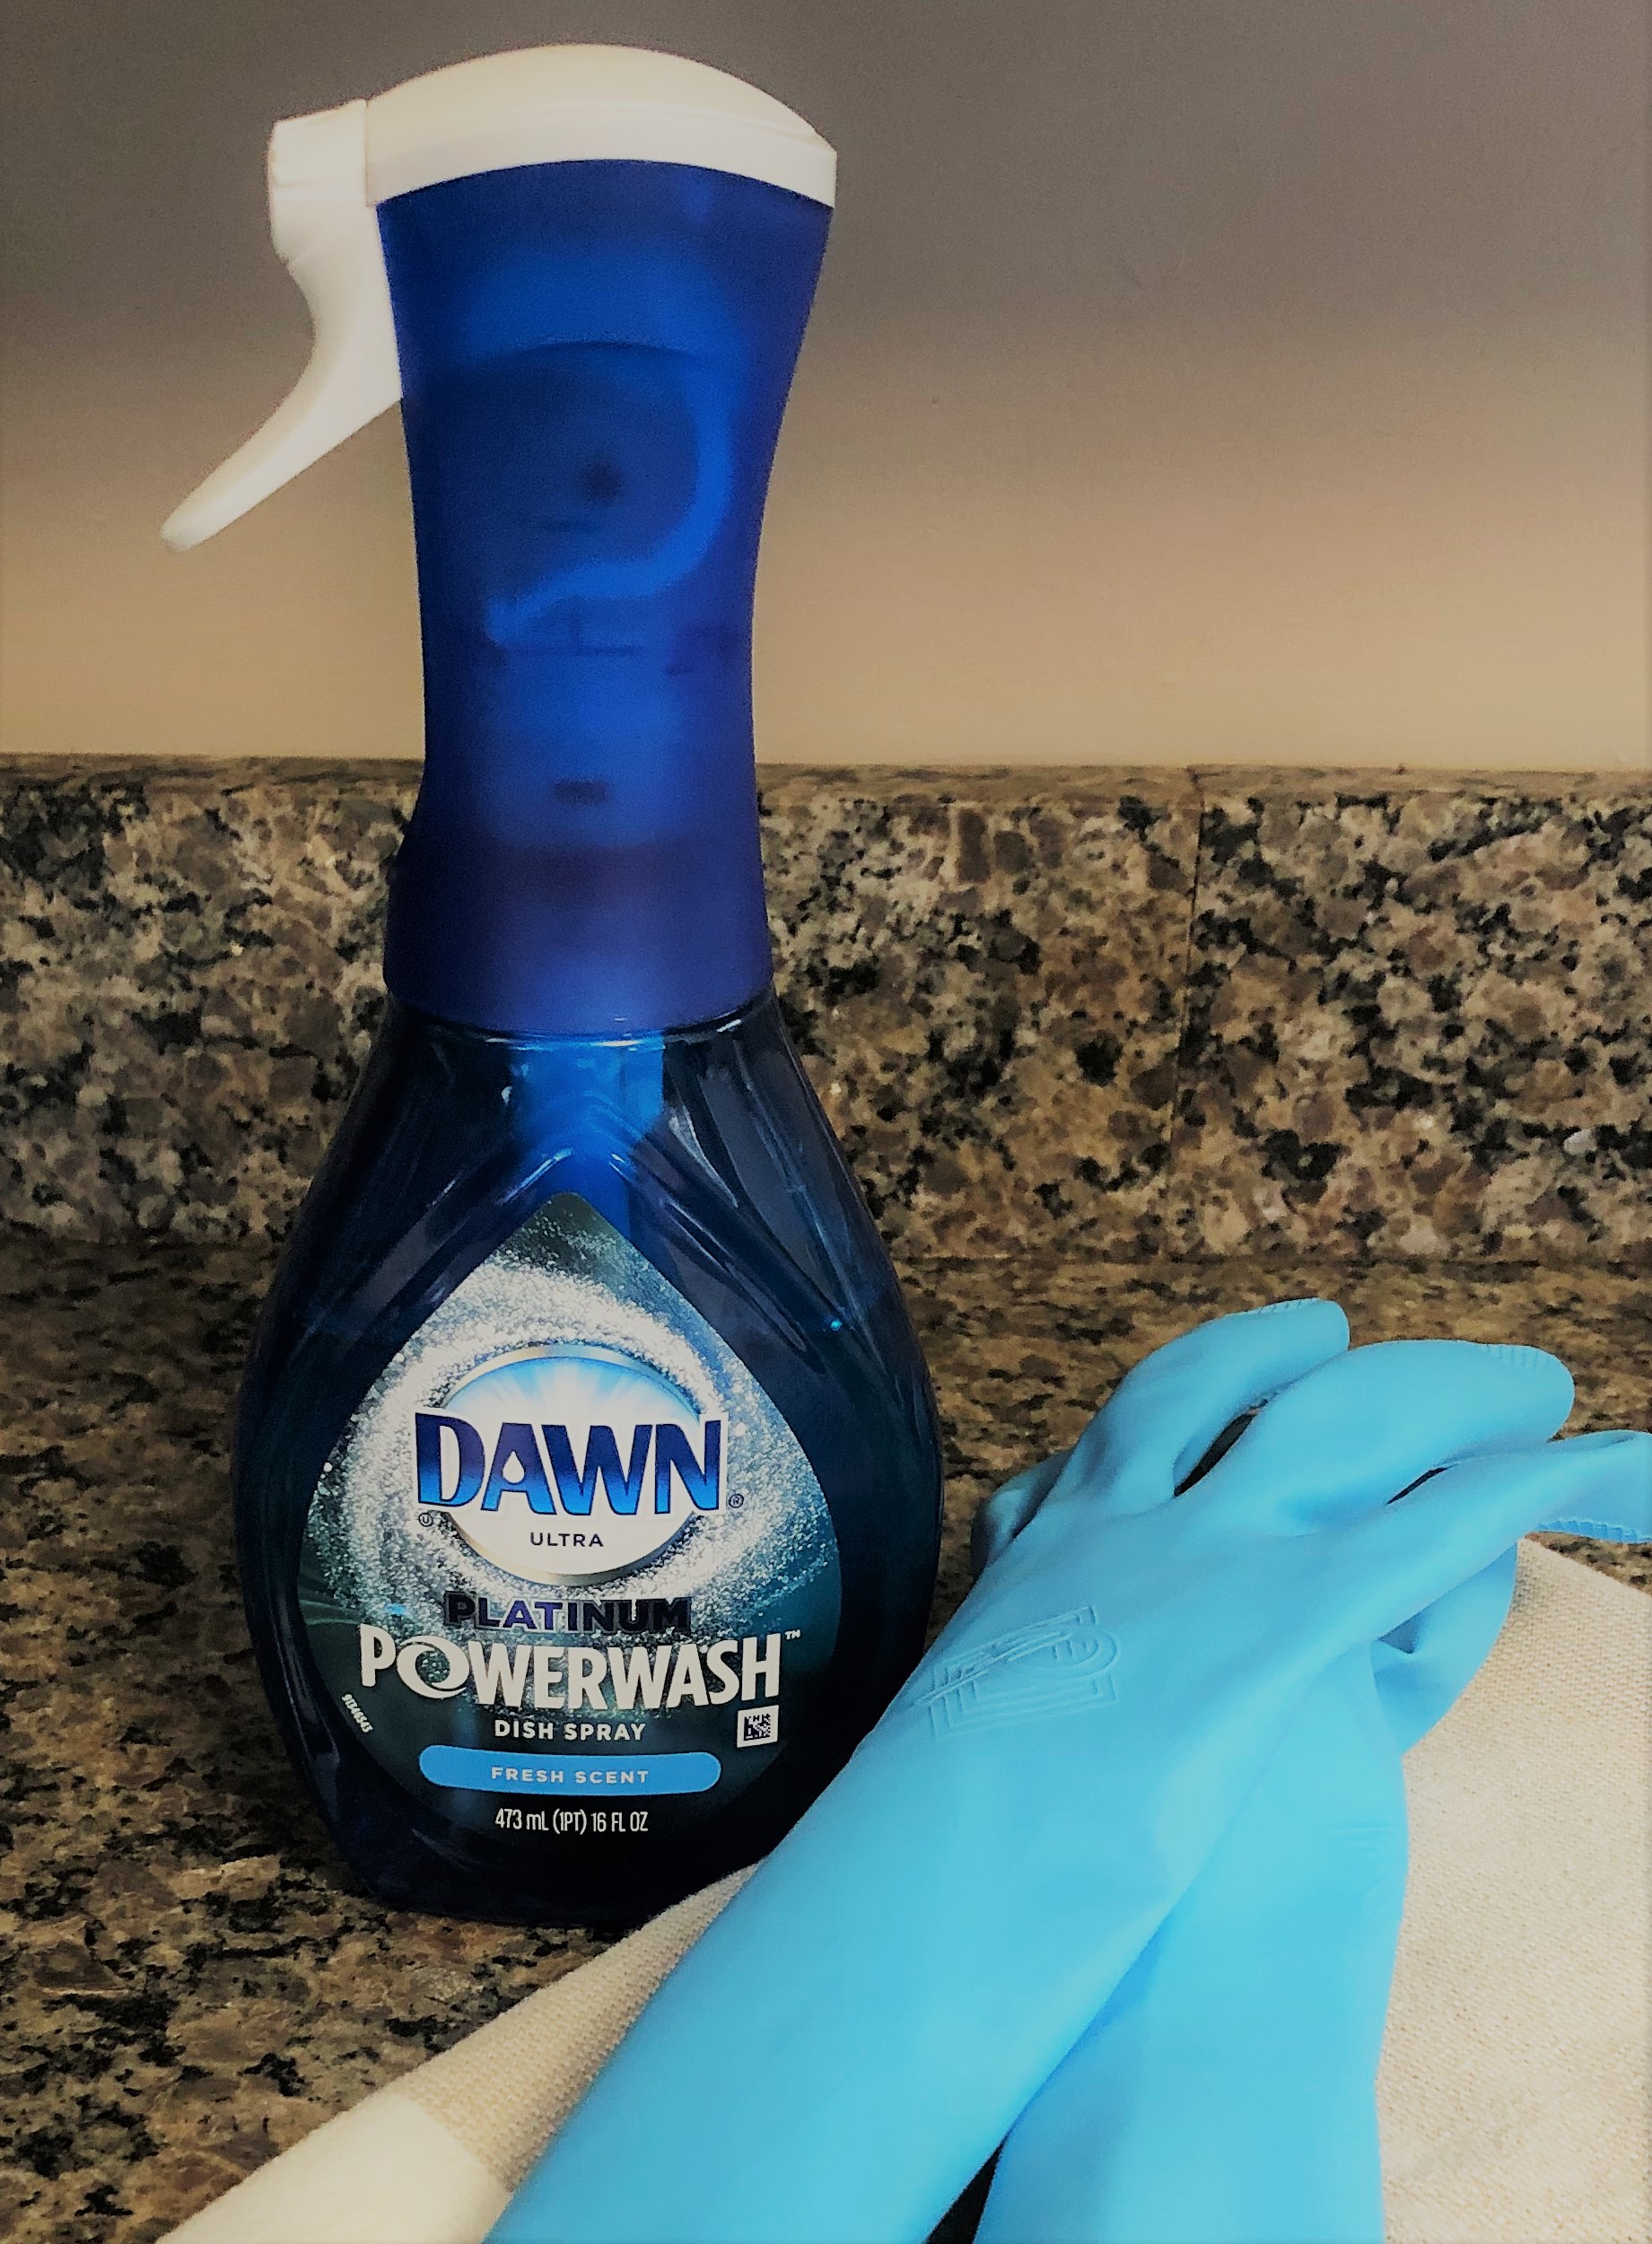 7 Things to Clean Now with Dawn Powerwash • Start with the Bed